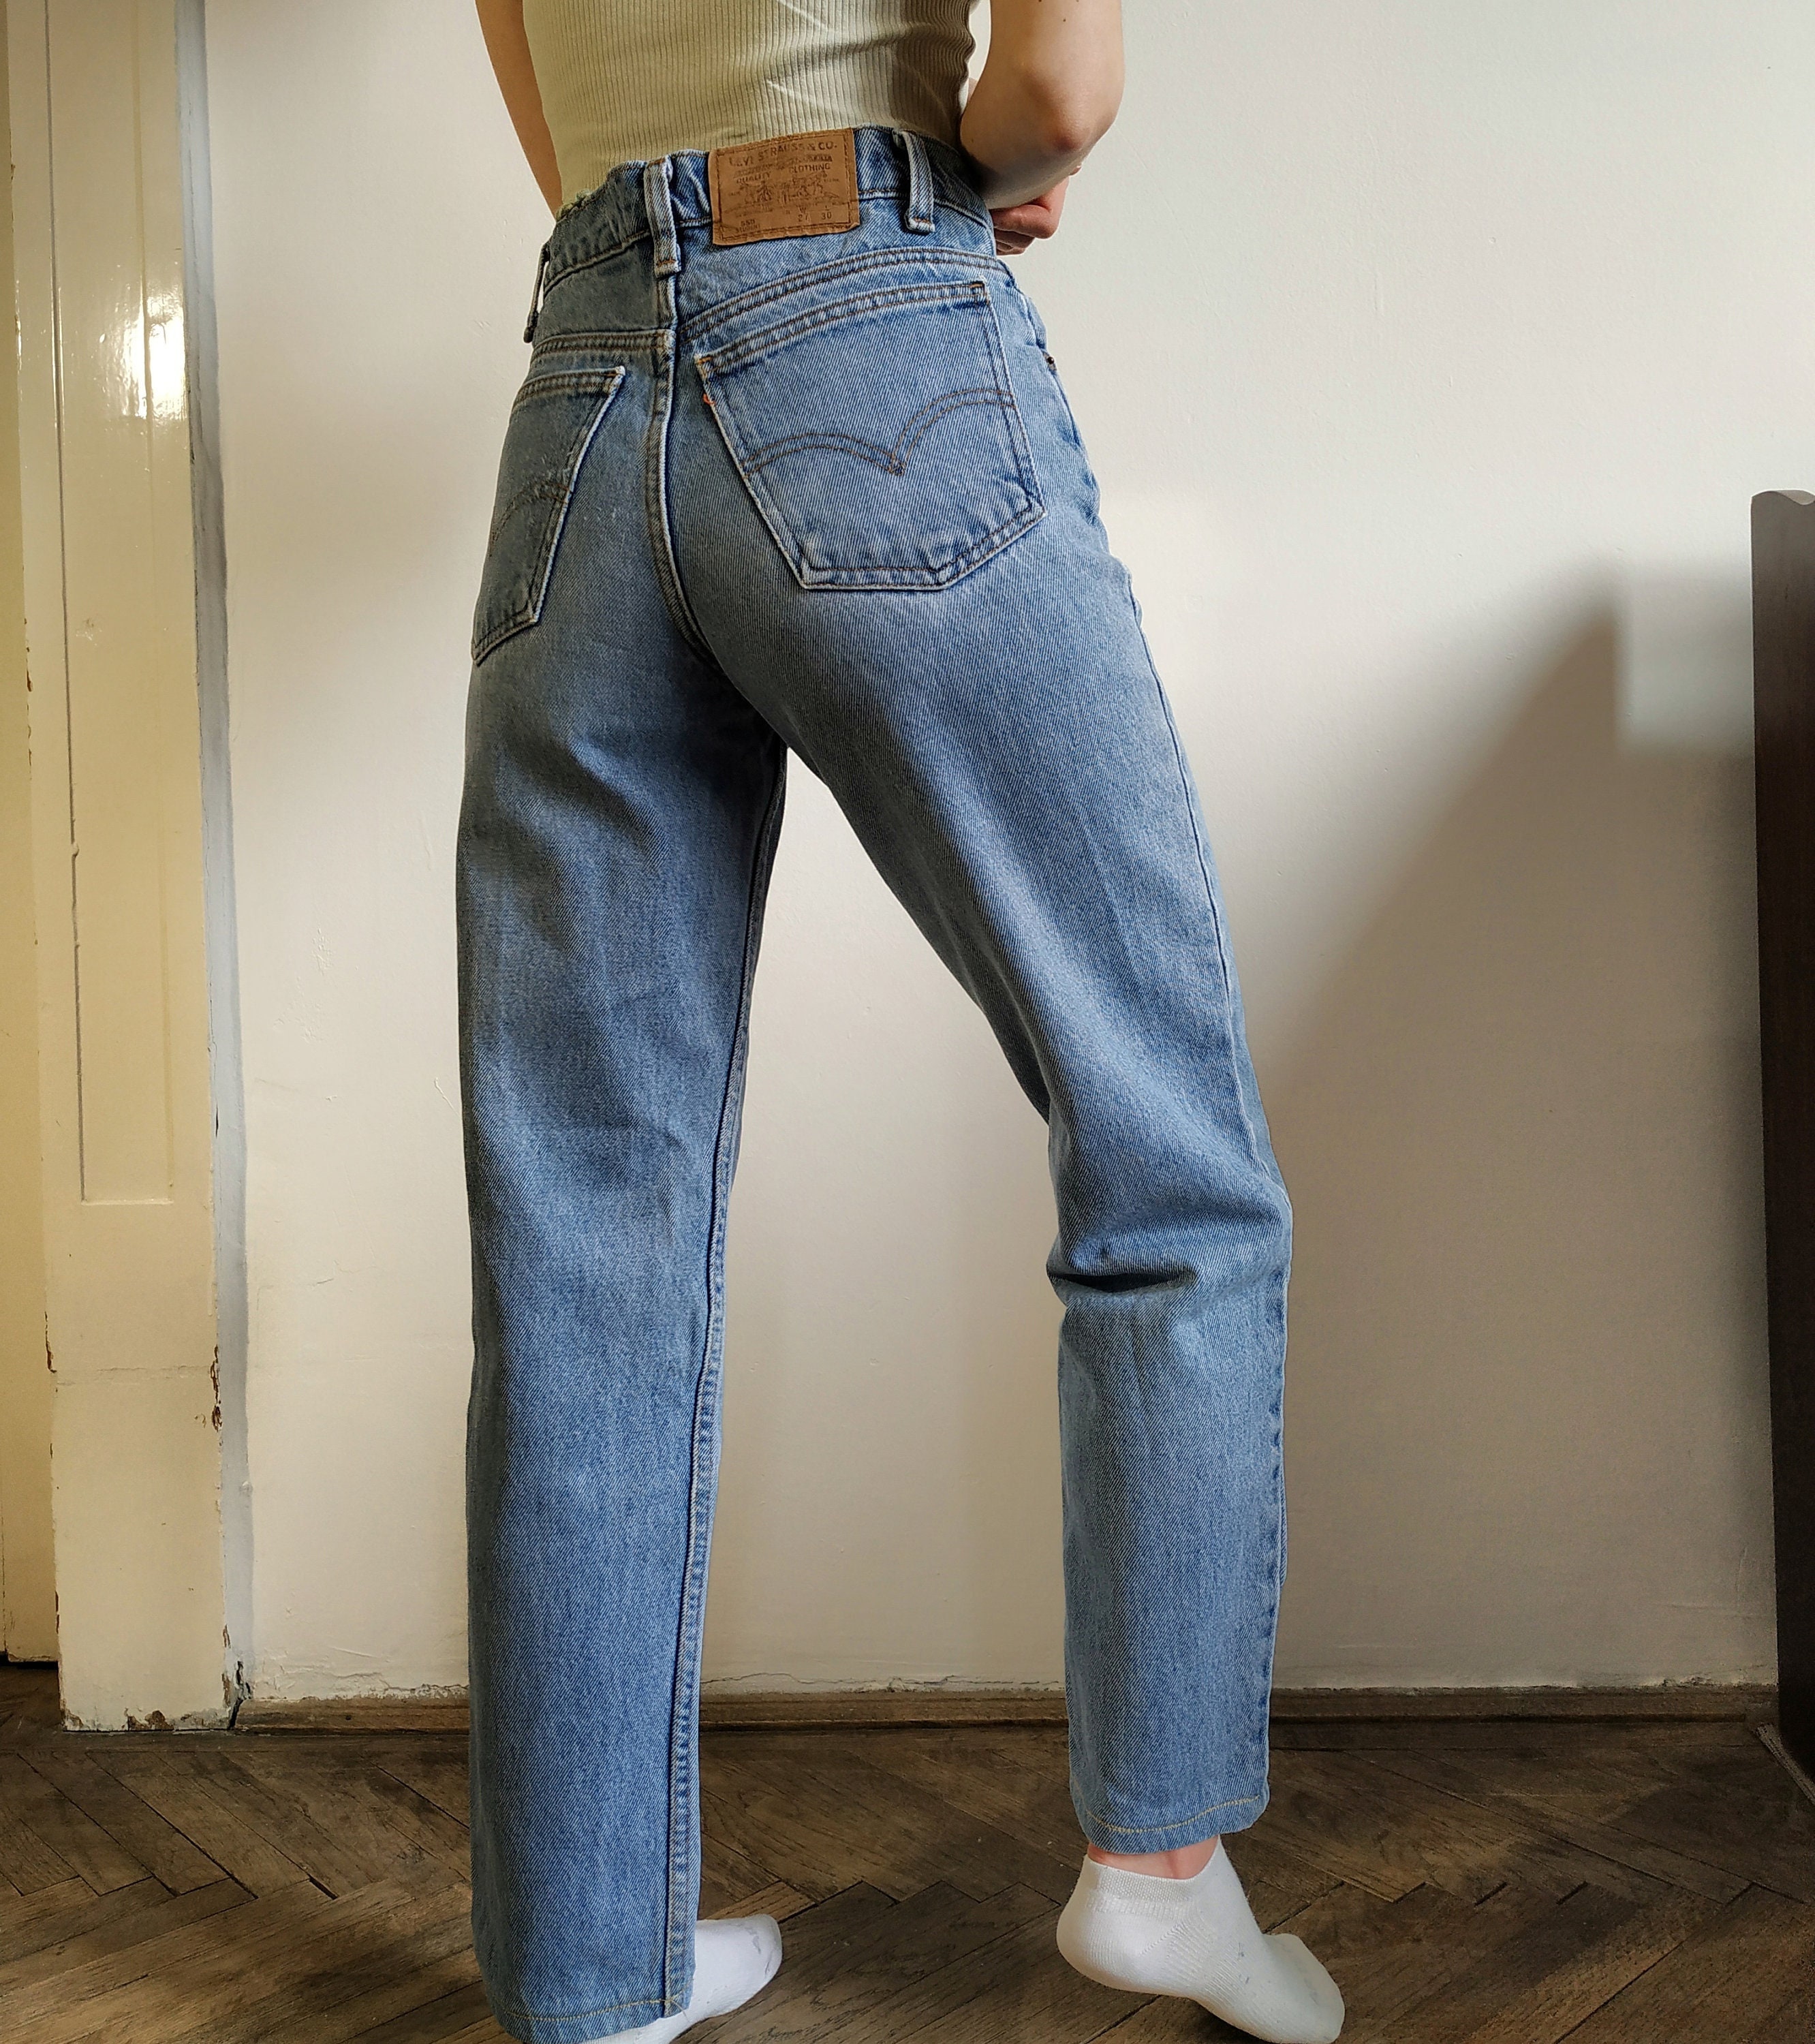 Levis 550 Jeans Student W26 L28 / Made in USA 90s / Medium Wash - Etsy